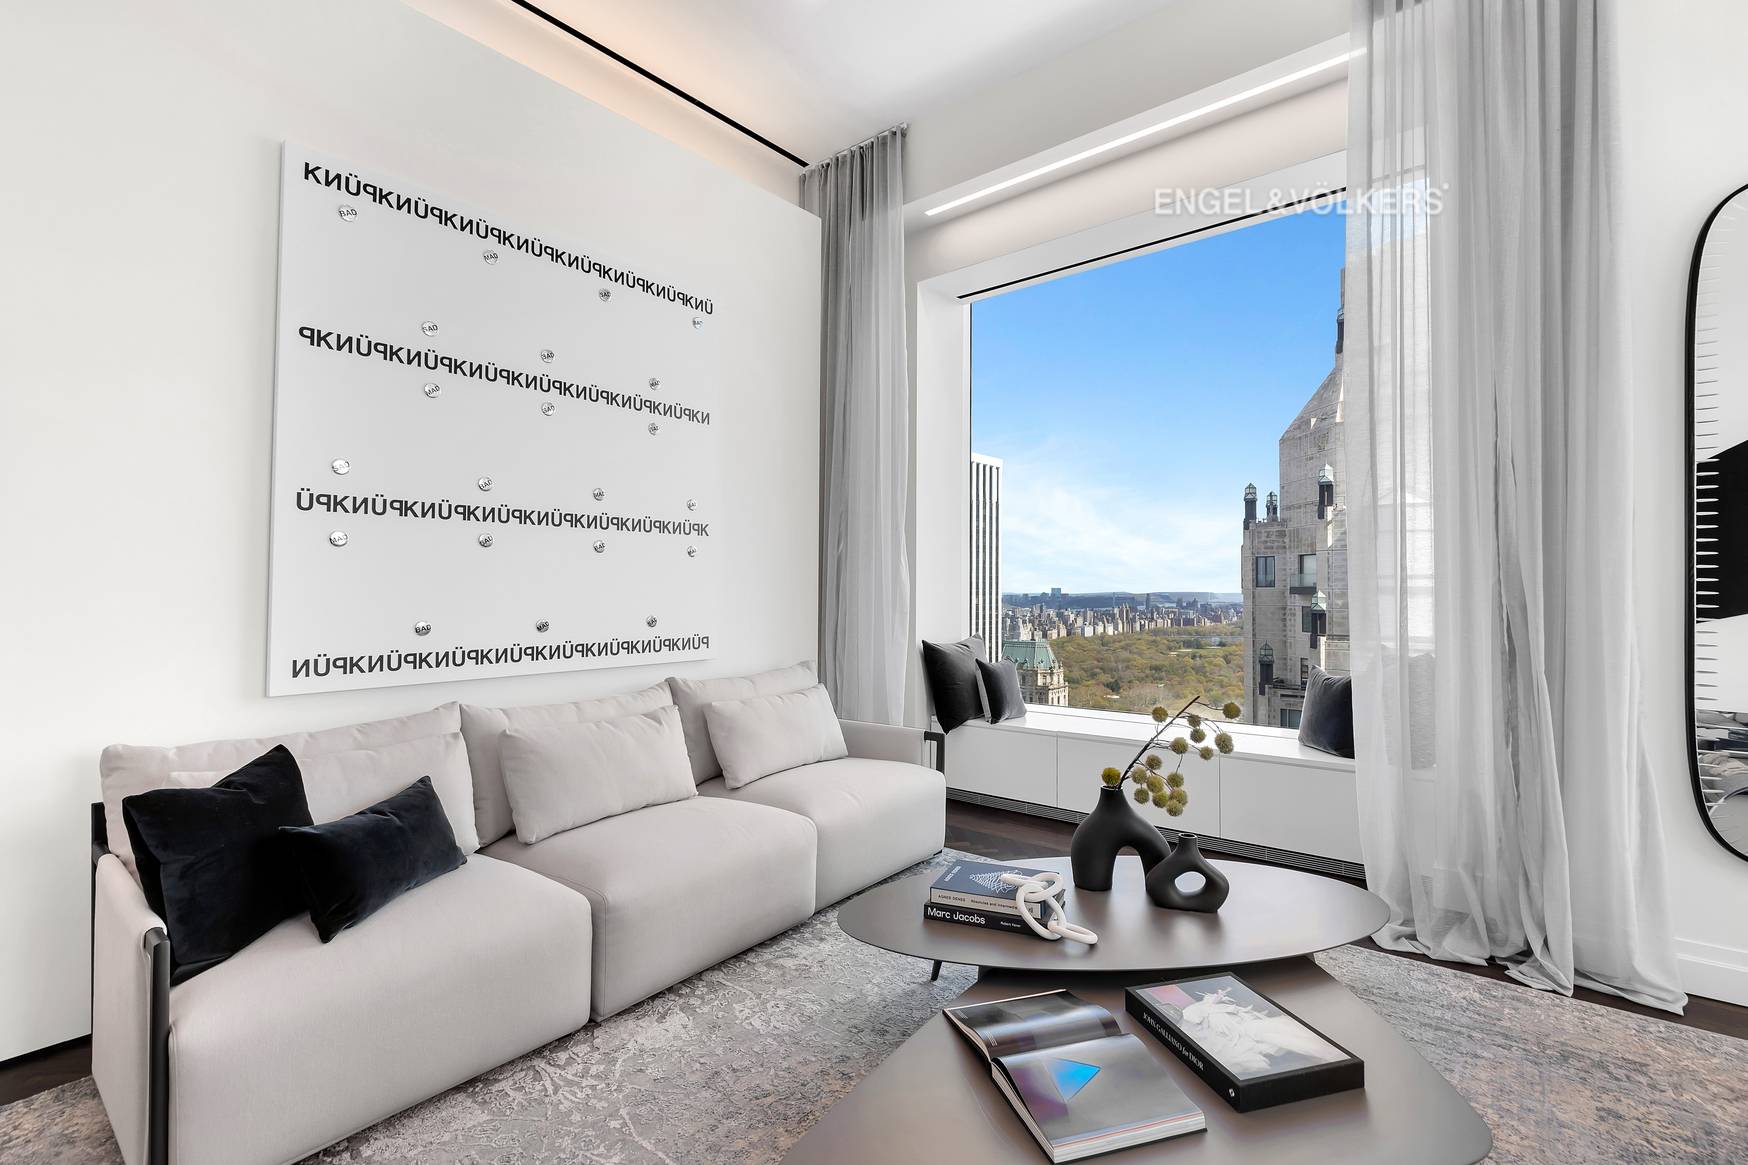 Overlooking Central Park from the 50th floor of the iconic 432 Park Avenue, this 1, 789 square foot 166 square meter two bedroom, two bathroom residence features soaring 12 6 ...